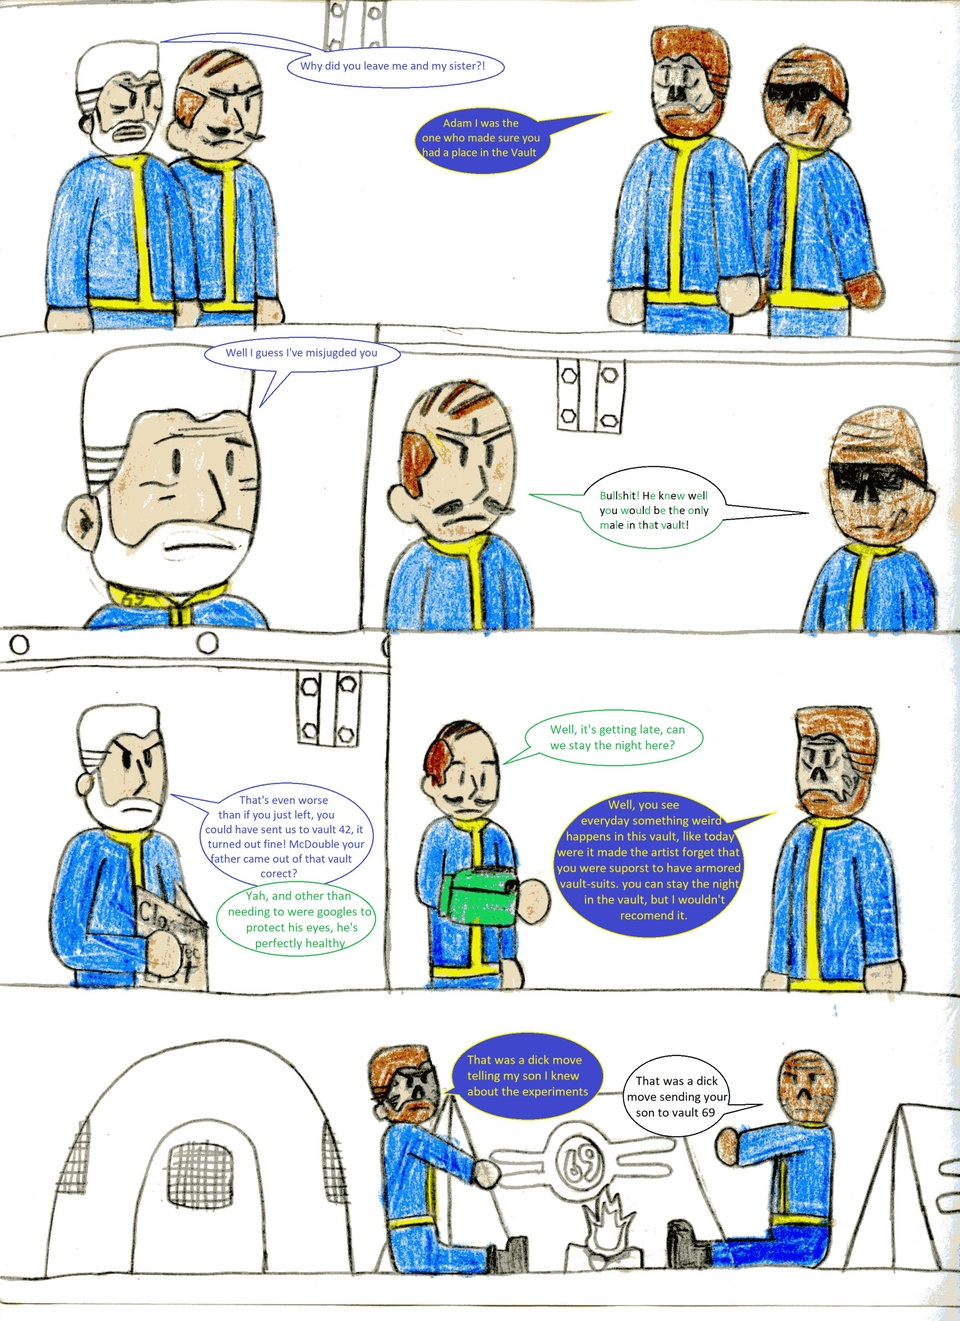 Episode 19: The Grandfather of Vault 69